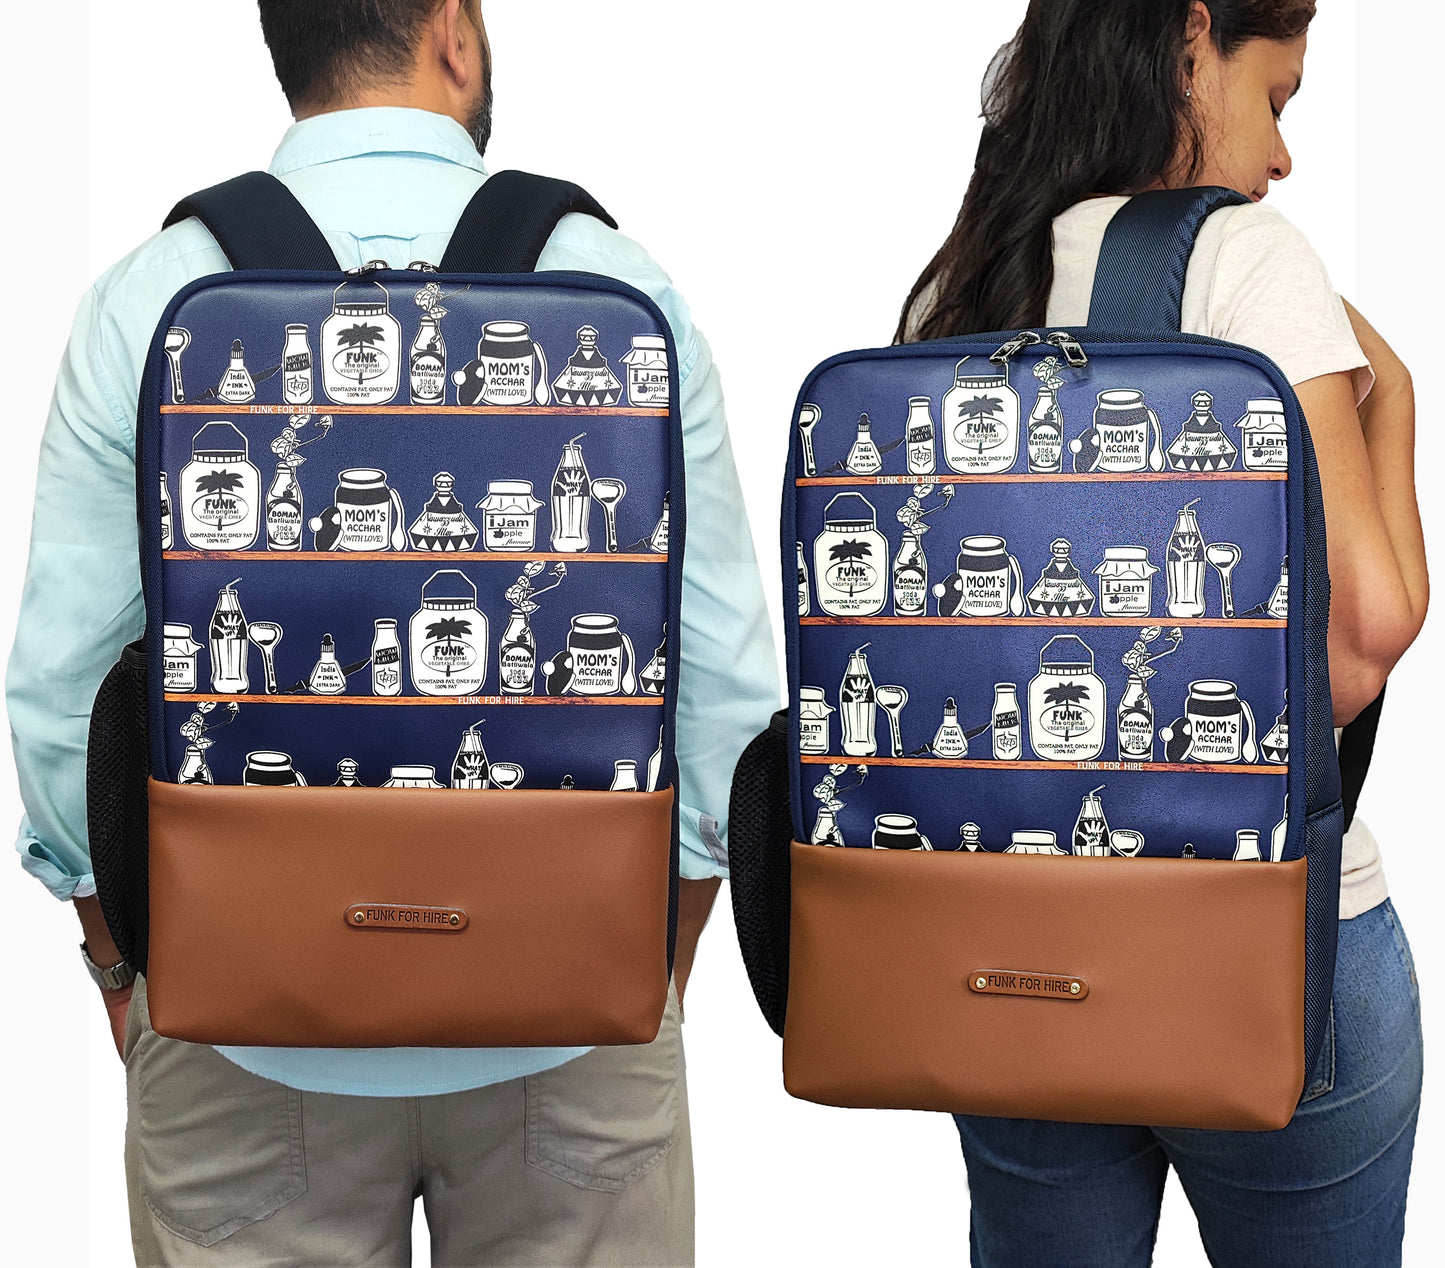 Free Card Wallet with Bottle Laptop Navy Backpack